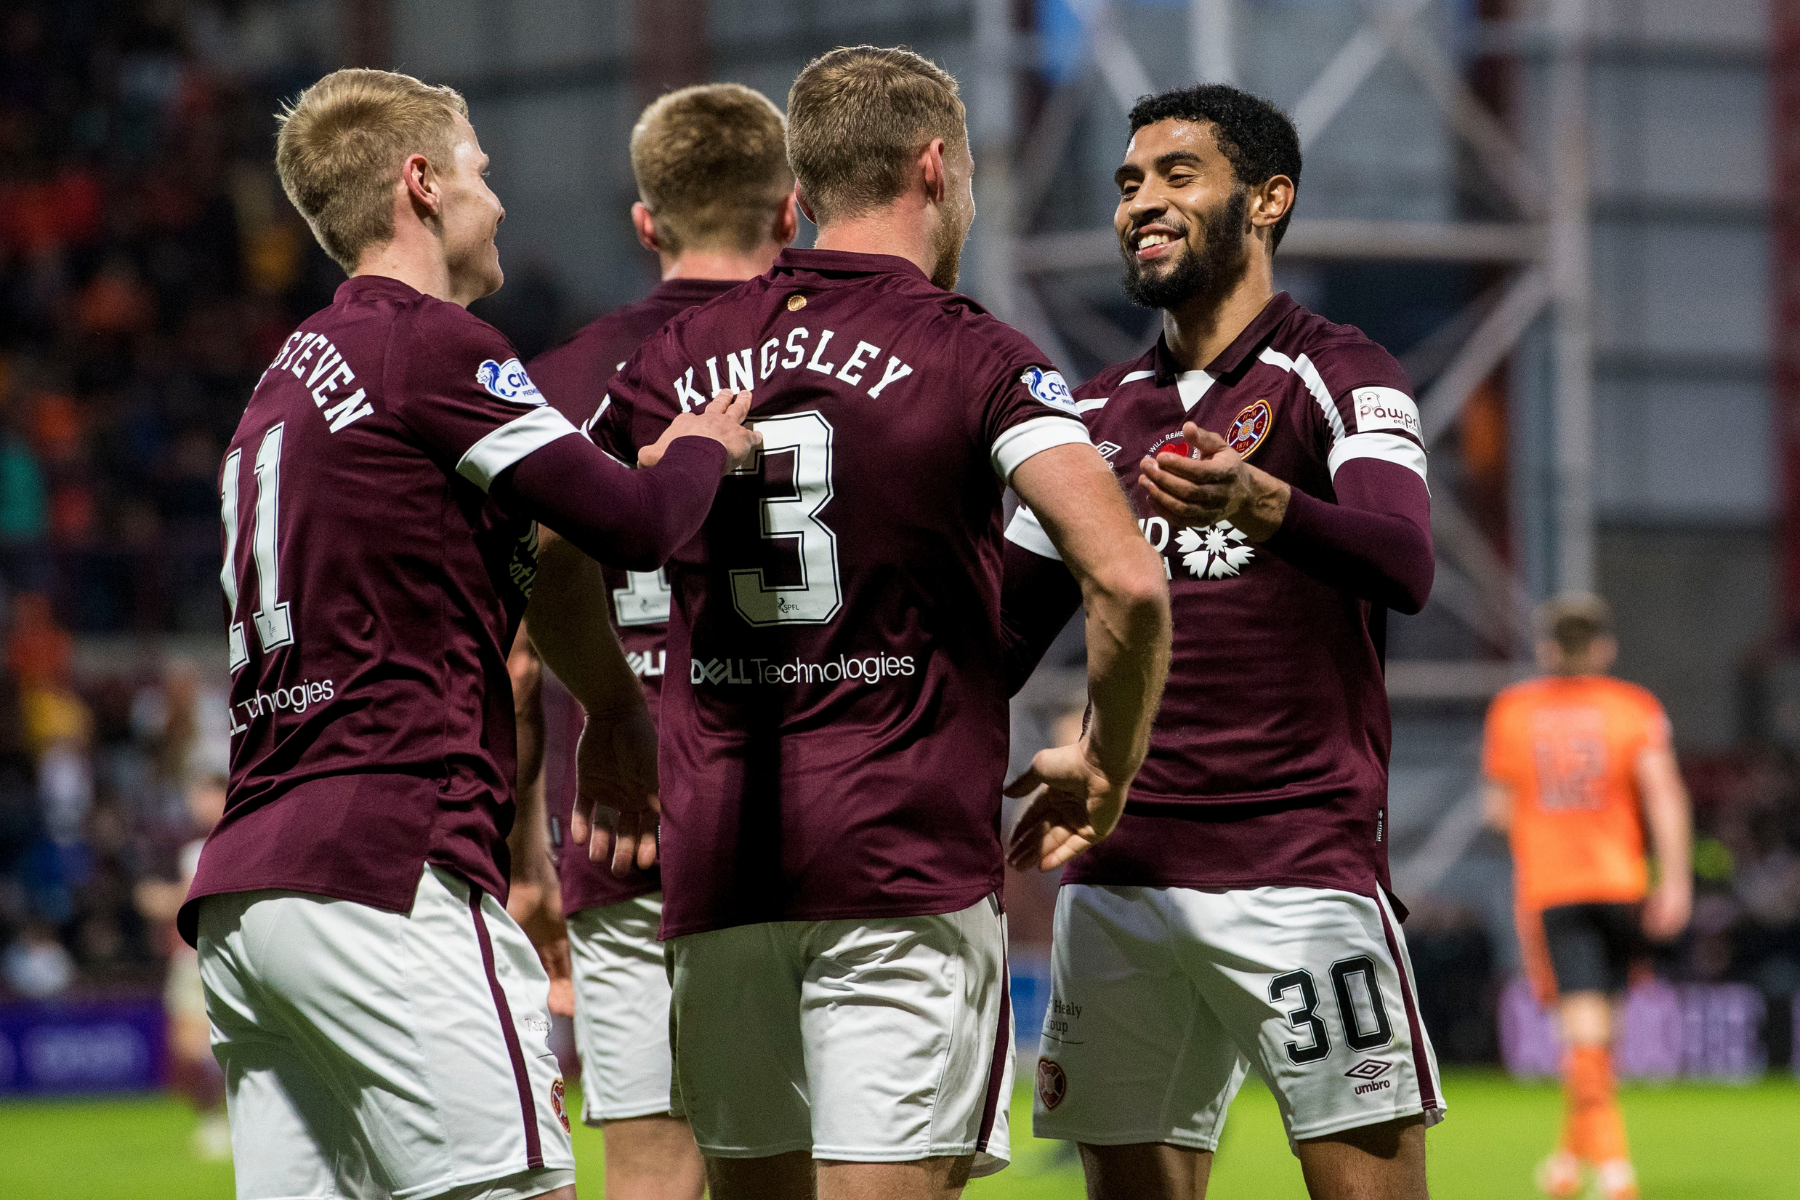 Hearts forward Josh Ginnelly on why the Tynecastle club can keep applying pressure on Celtic and Rangers